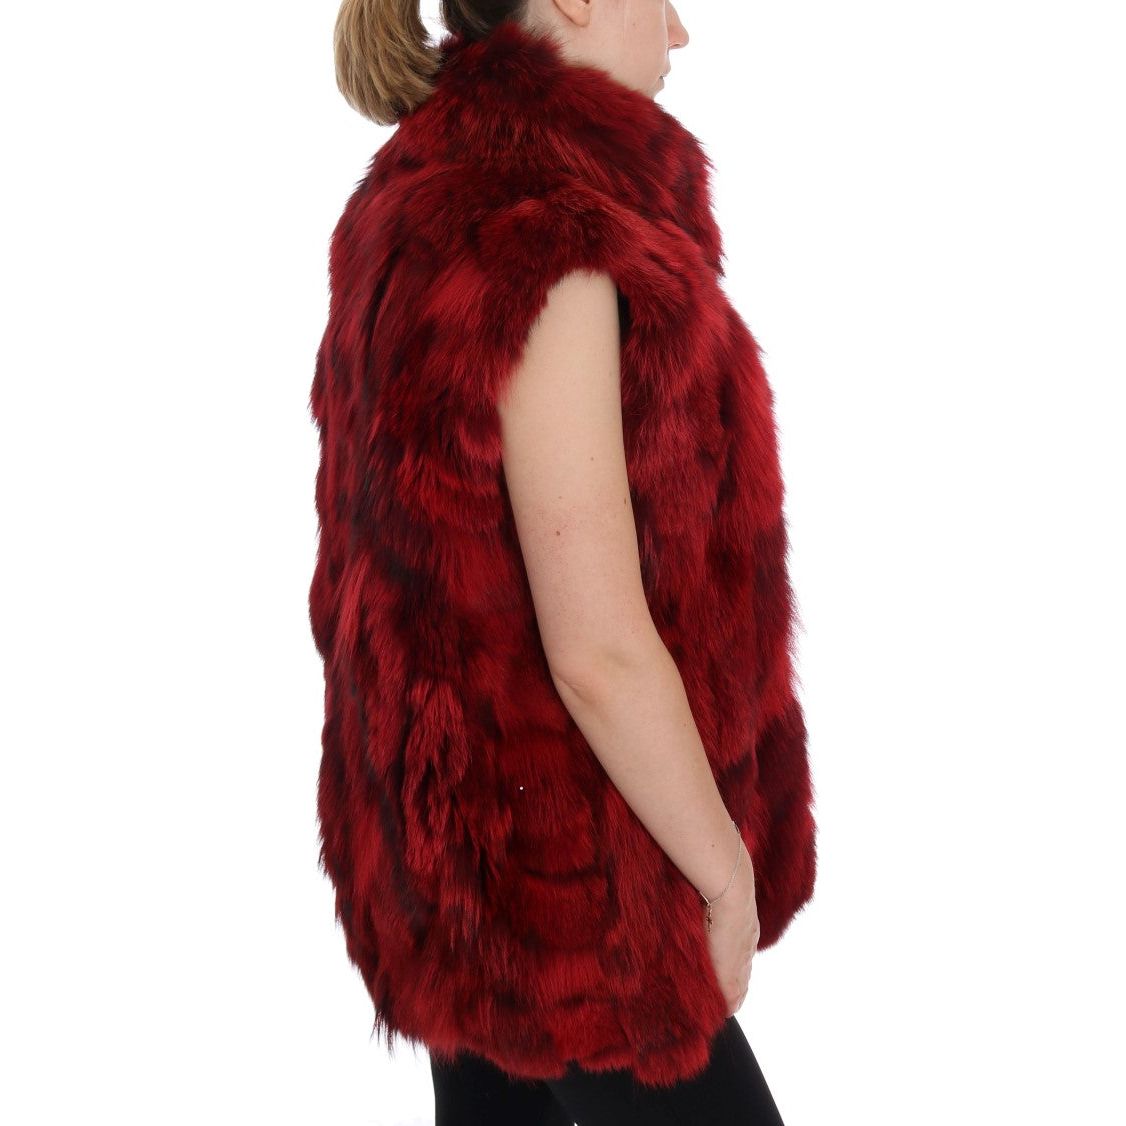 Dolce & Gabbana Luxurious Red Coyote Fur Long Vest Jacket Coats & Jackets red-coyote-fur-sleeveless-coat-jacket